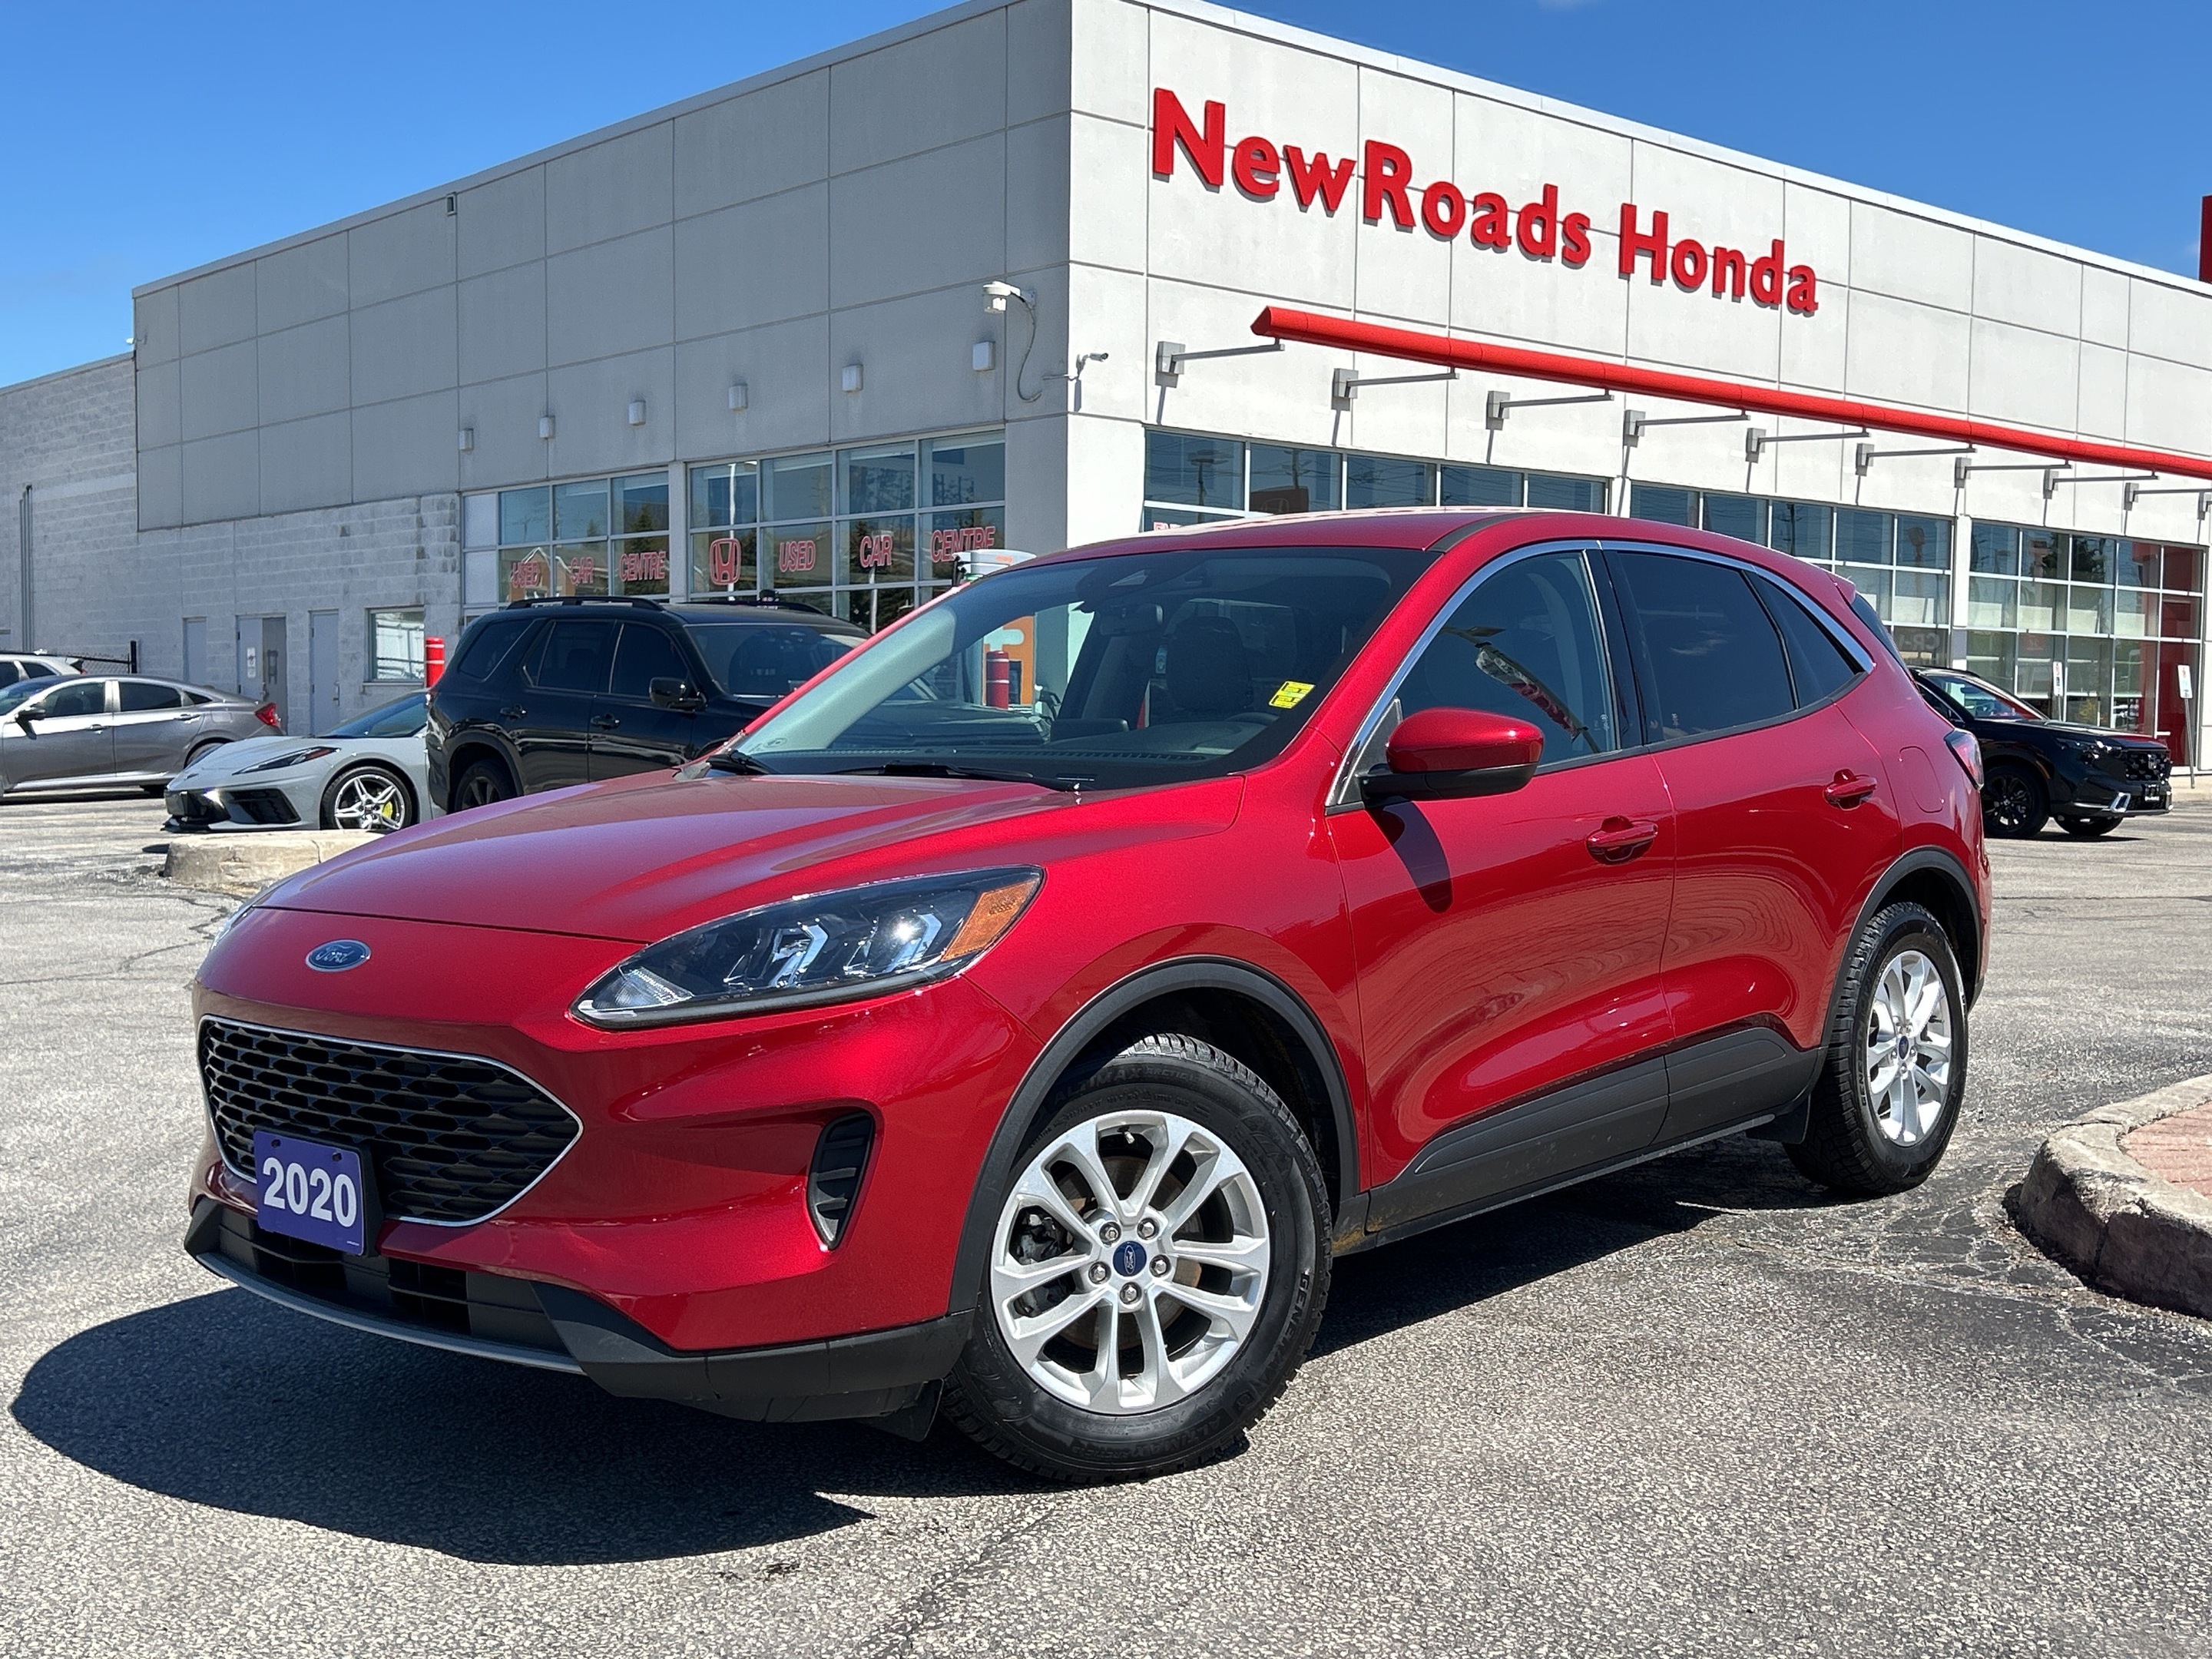 2020 Ford Escape One Owner, Well Kept, Great Price!